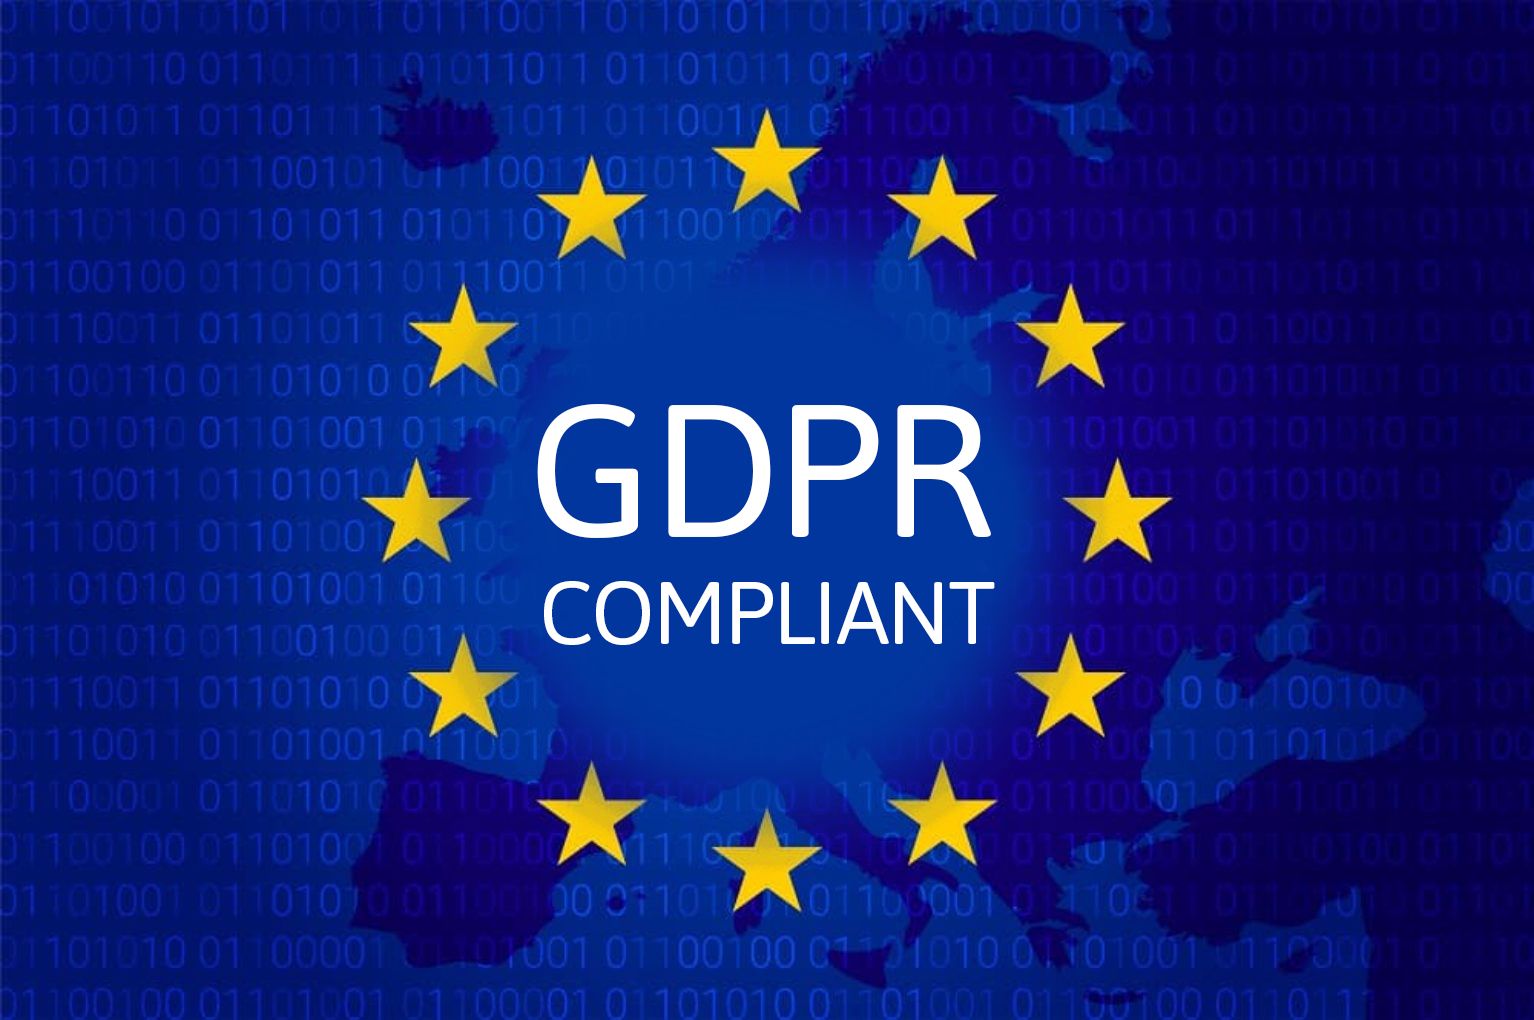 European GDPR Compliance at STid Group